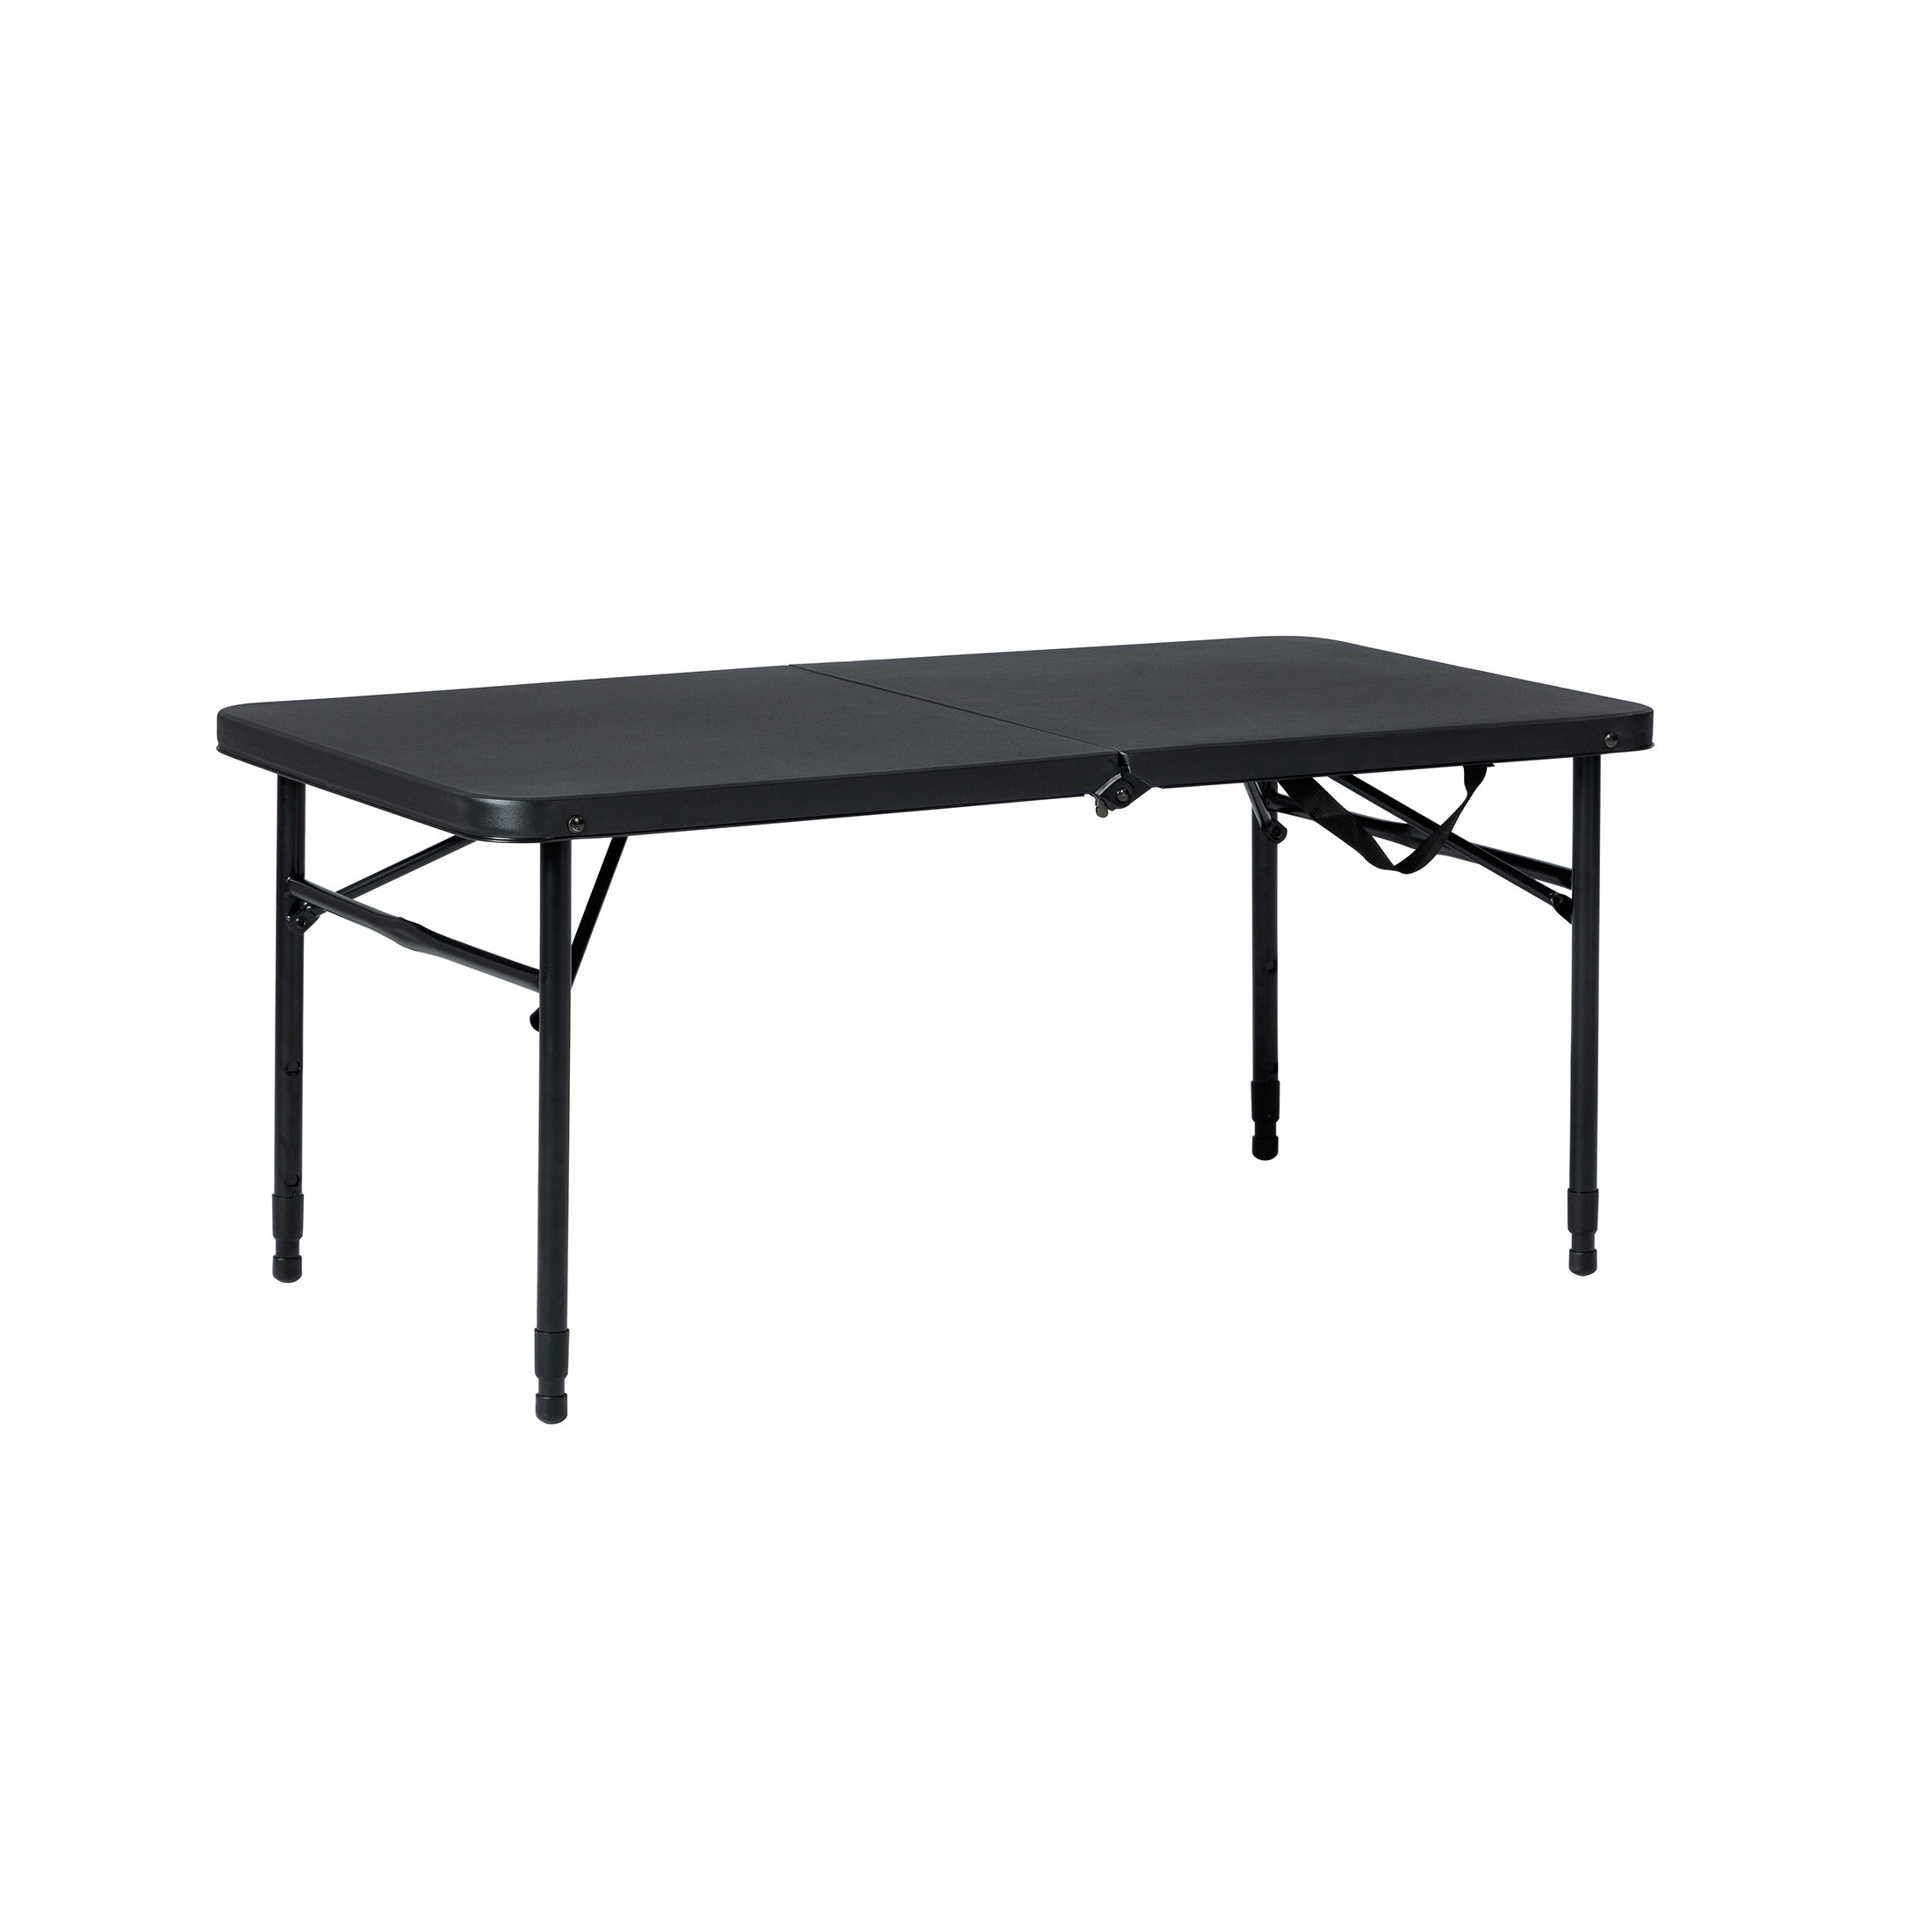 Mainstays 40"L x 20"W Plastic Adjustable Height Fold-in-Half Folding Table, Rich Black - image 4 of 11